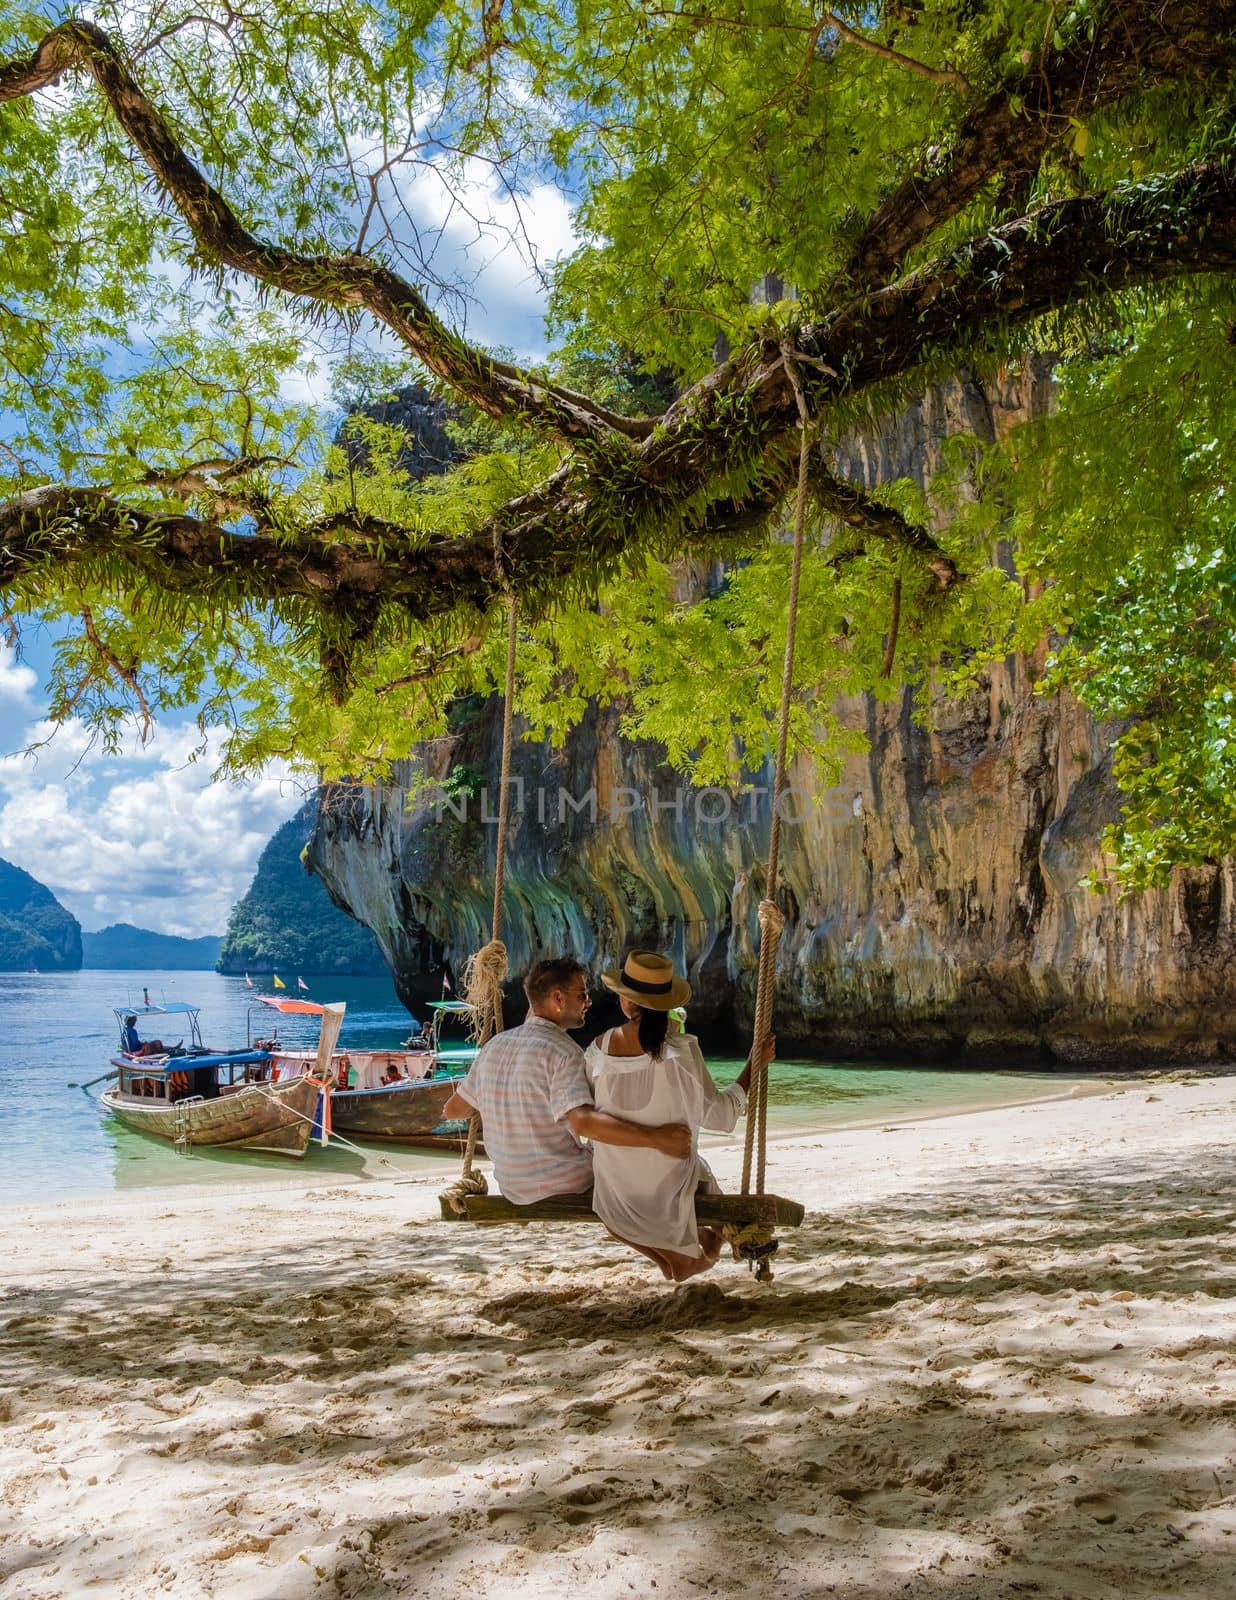 Couple on a boat trip to the Tropical lagoon of Koh Loa Lading Krabi Thailand part of Koh Hong by fokkebok